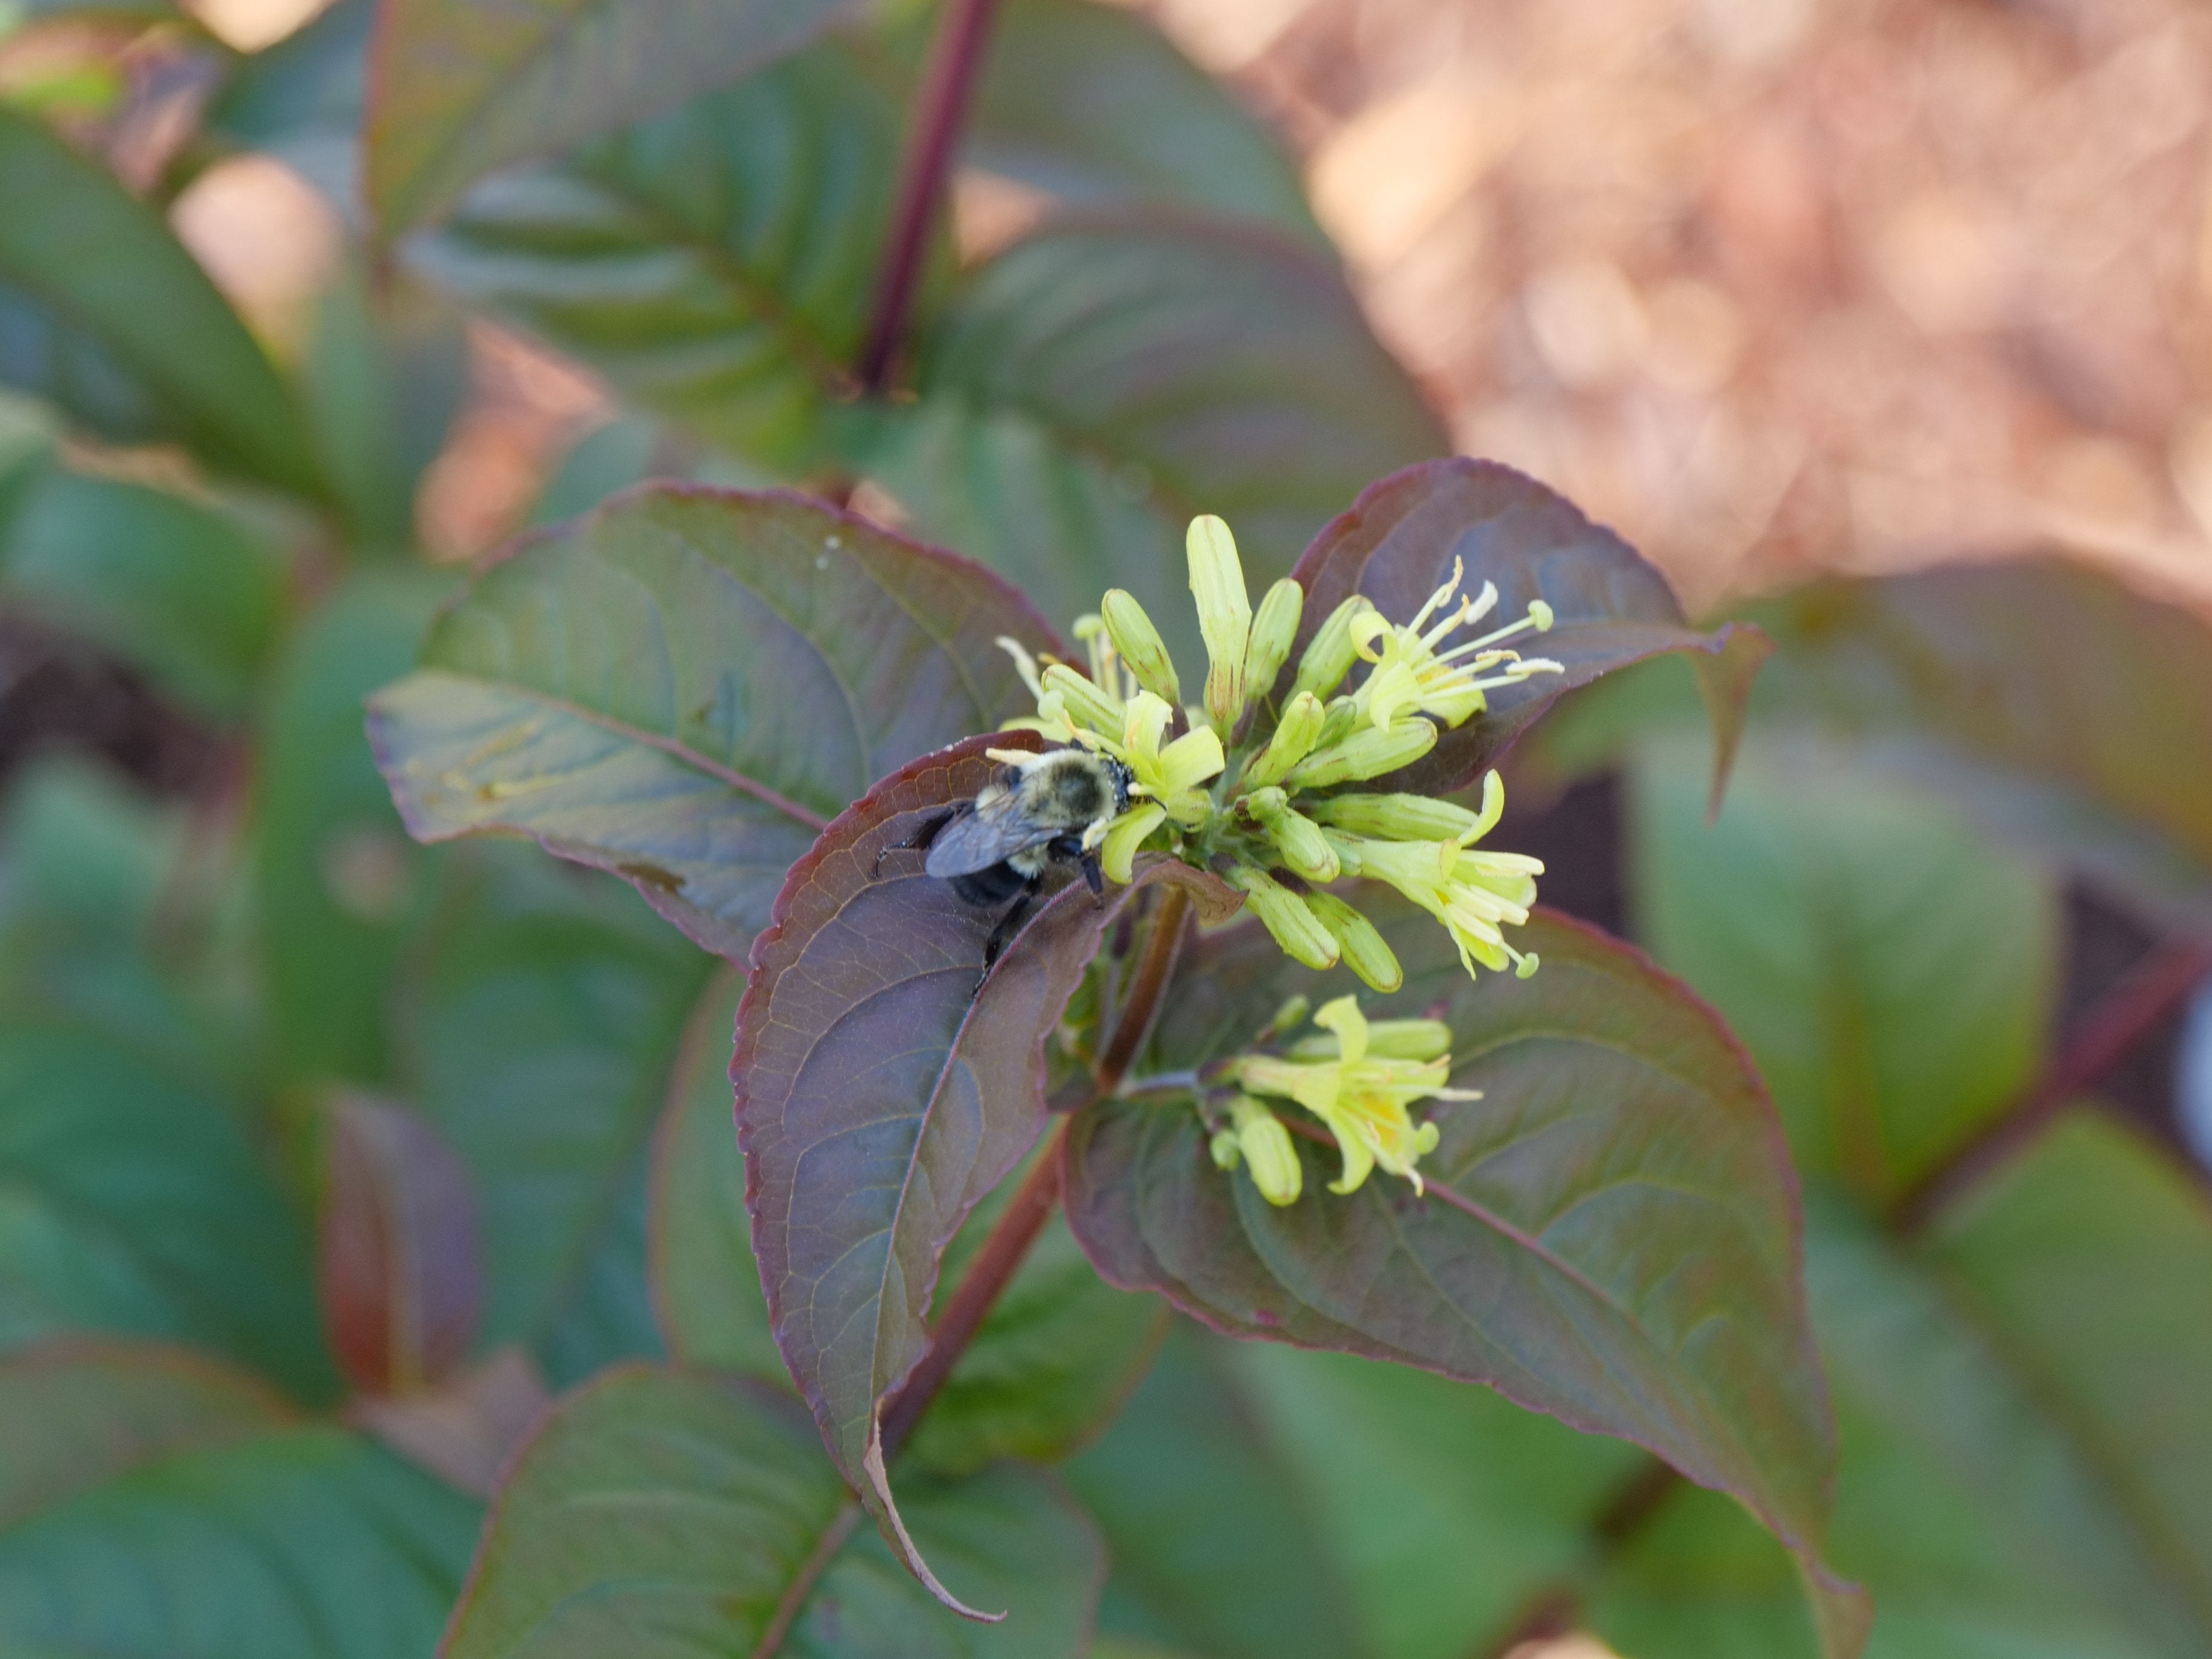 Closeup of the small yellow flowers of Kodiak Black diervilla being pollinated by a bumblebee.